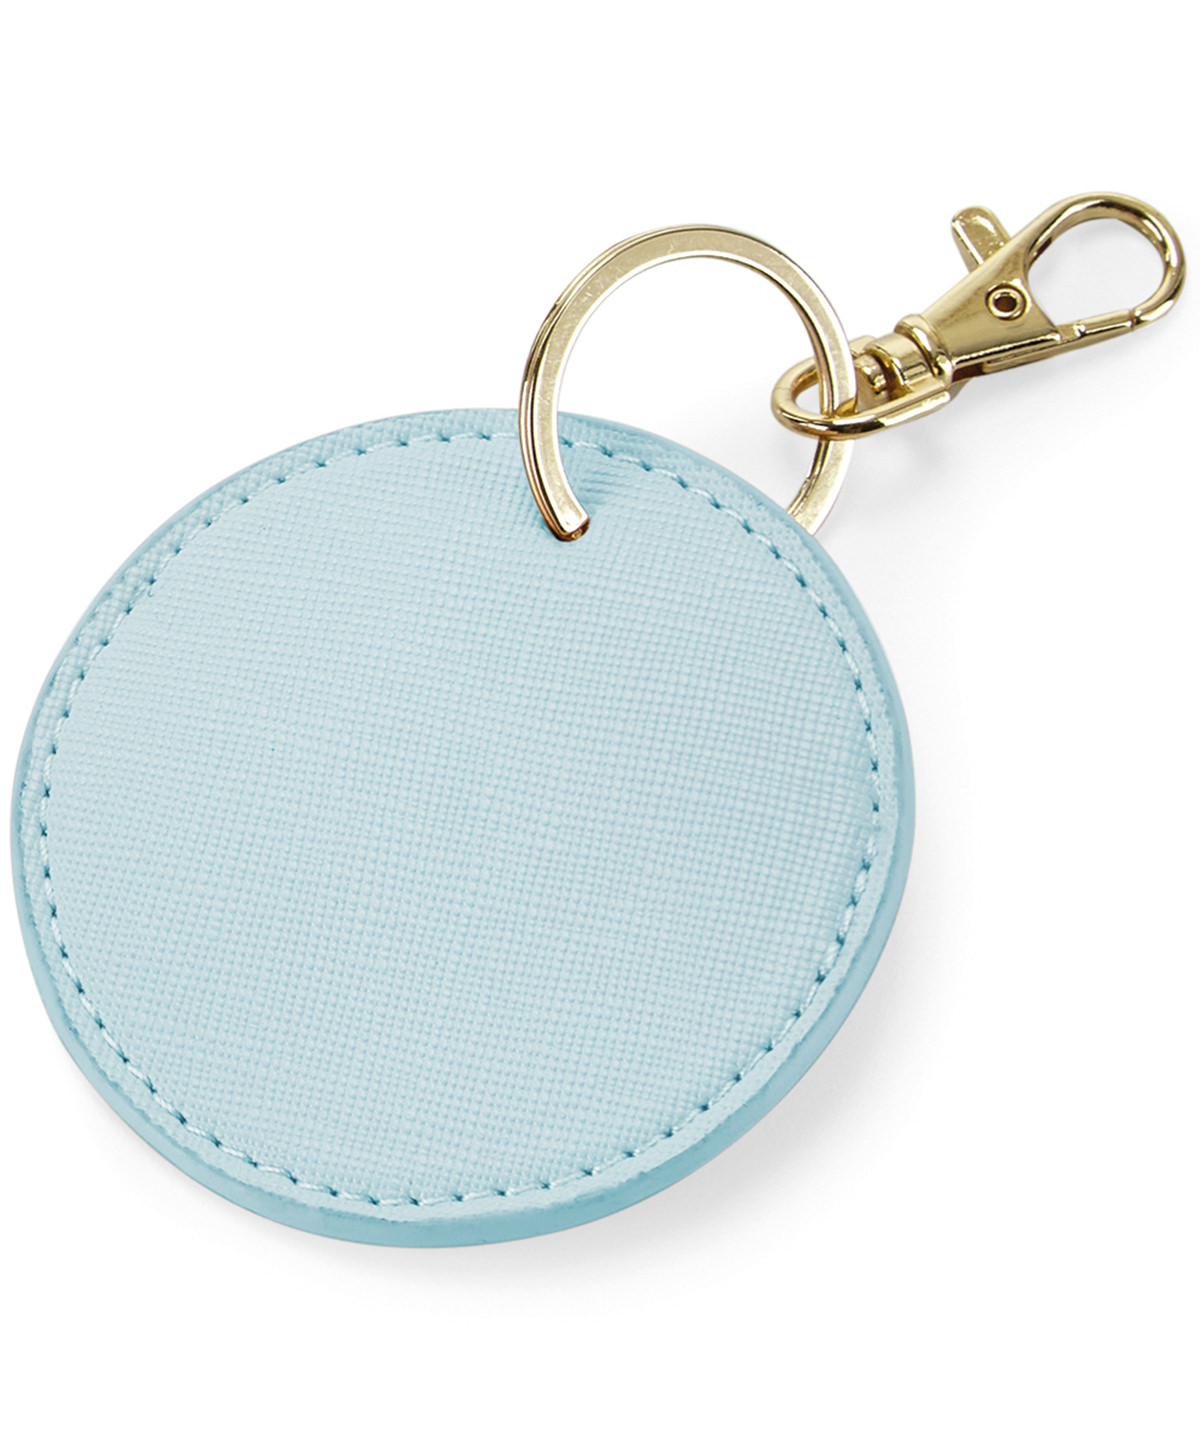 Boutique Circular Keyclip Soft Blue Size One Size